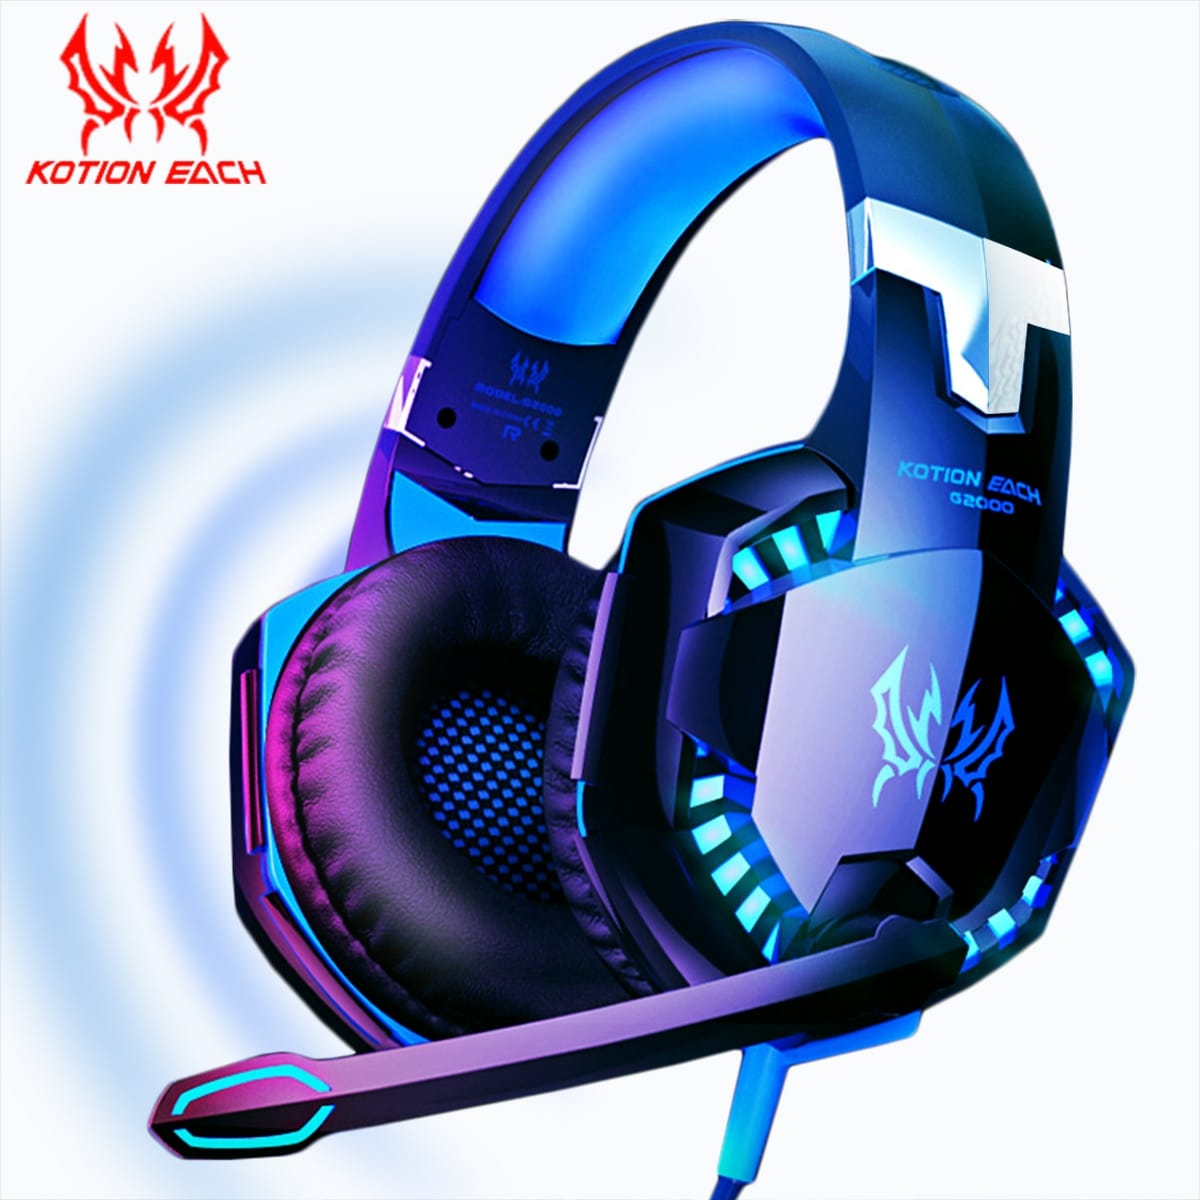 Smart Tech Shopping Gaming Headphones KOTION EACH Gaming Headset, Wired Over-Head Headphone For Computer PS4 Xbox